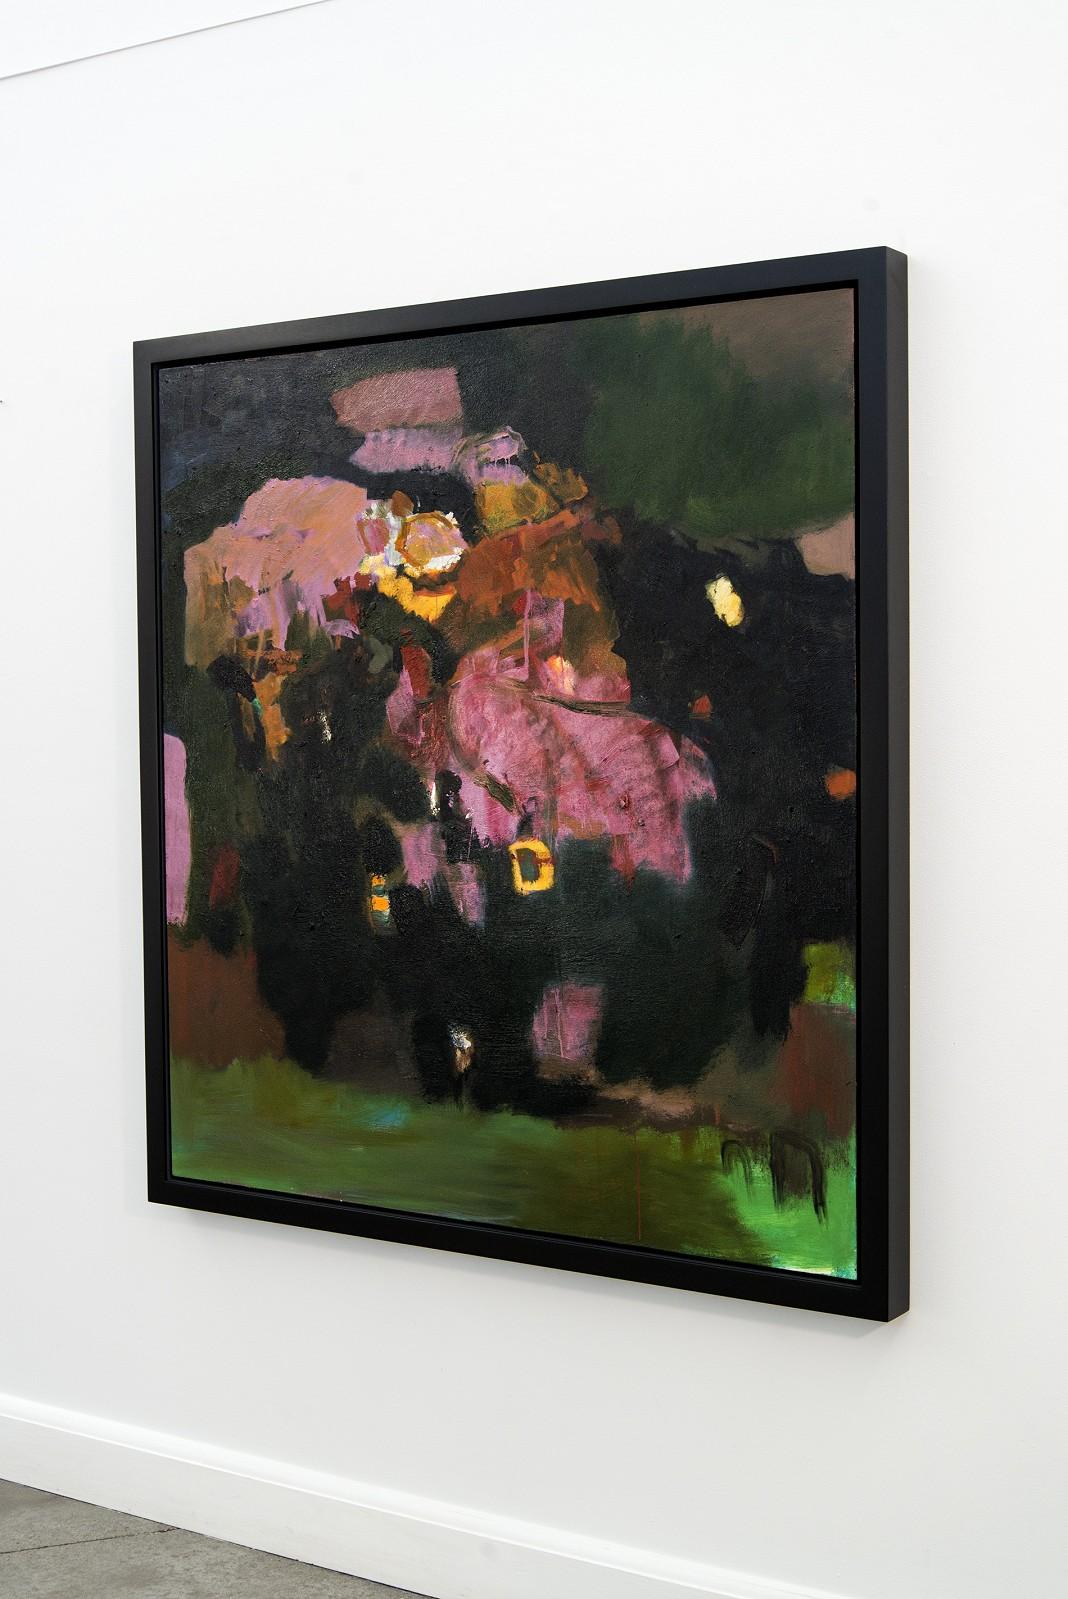 Yellow Buckle with Pinks - large, floral, abstracted still life, oil on canvas - Contemporary Painting by Jennifer Hornyak